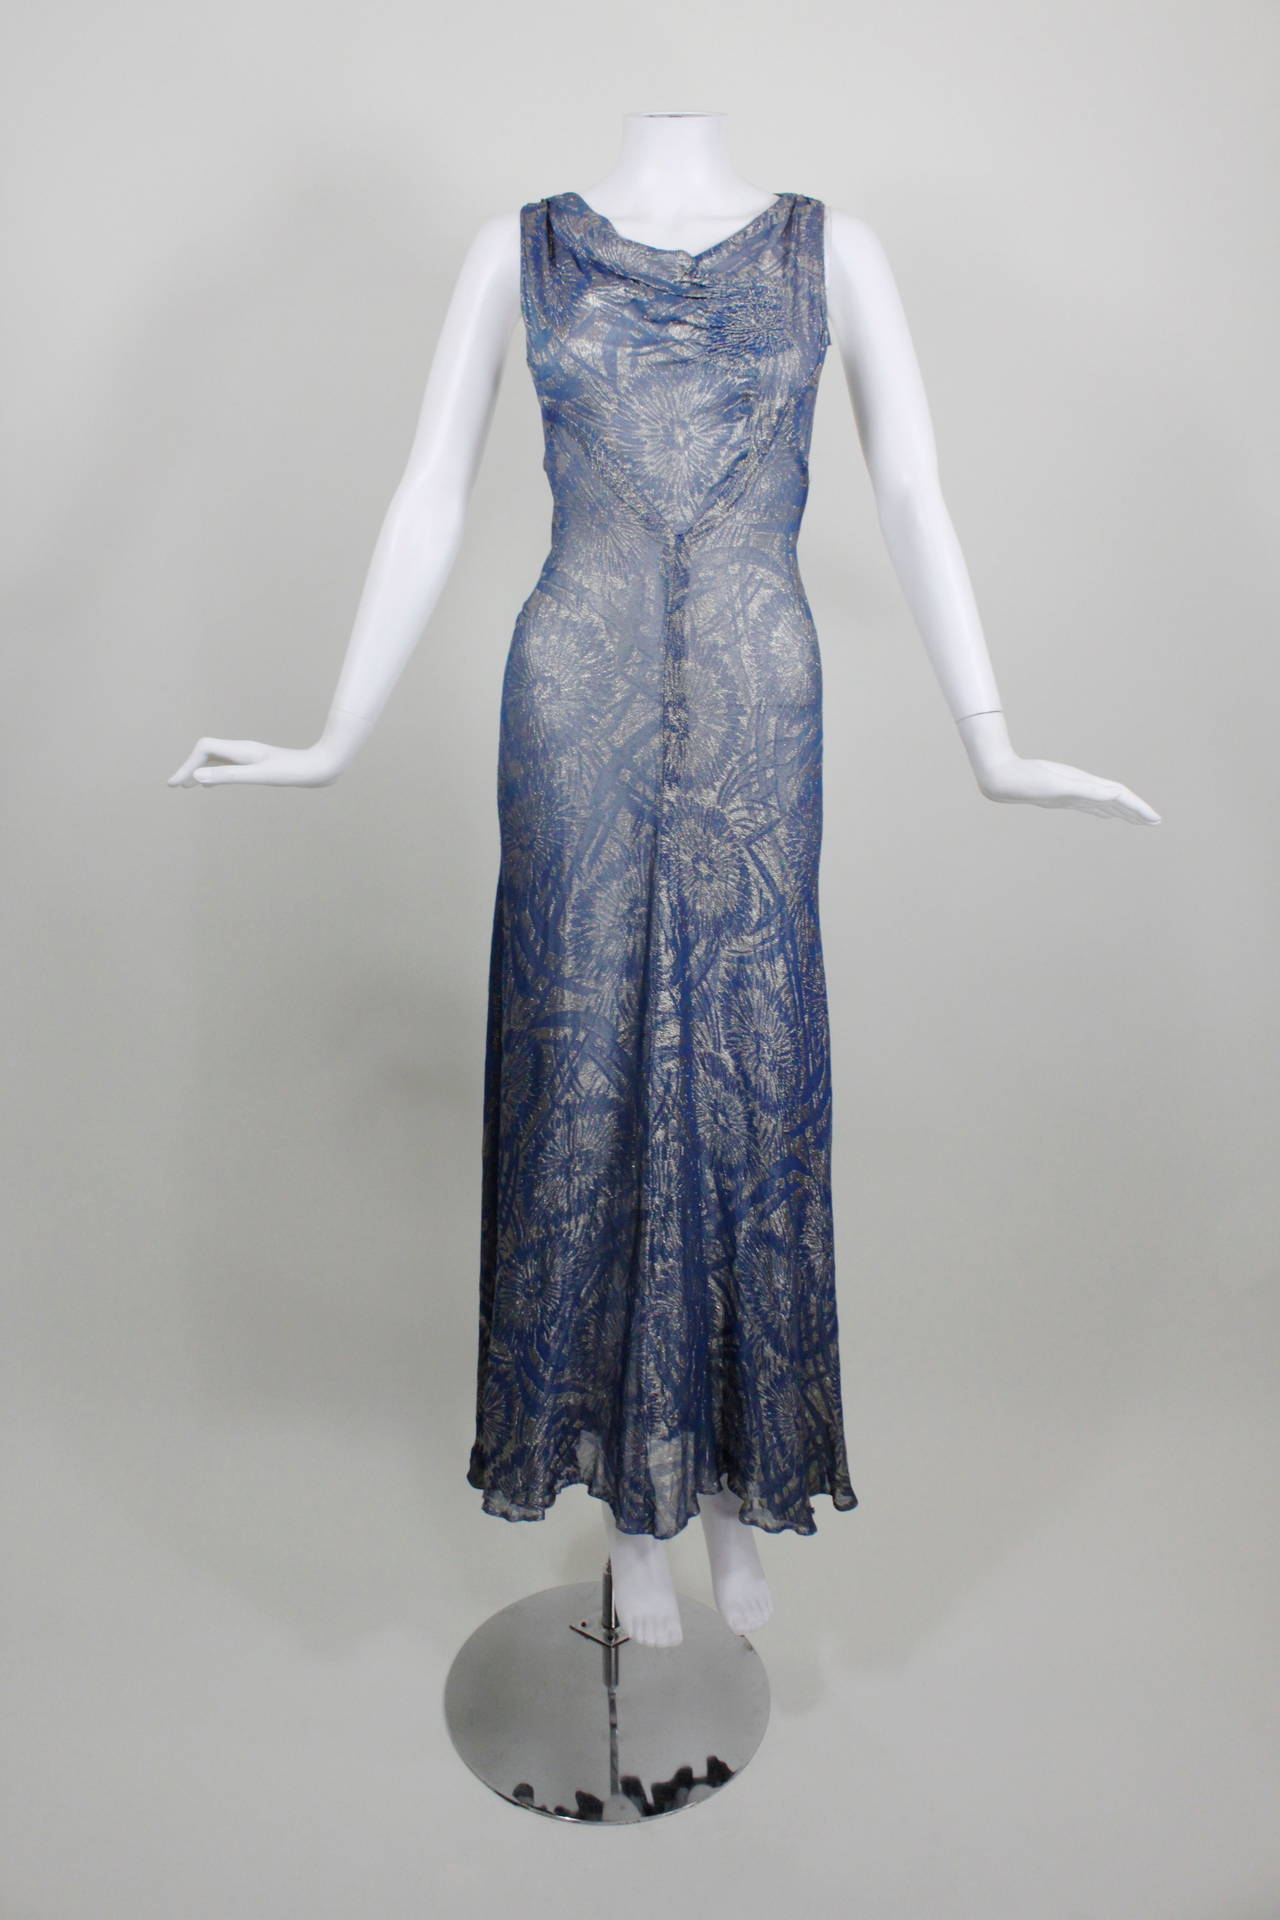 1920s evening gown history